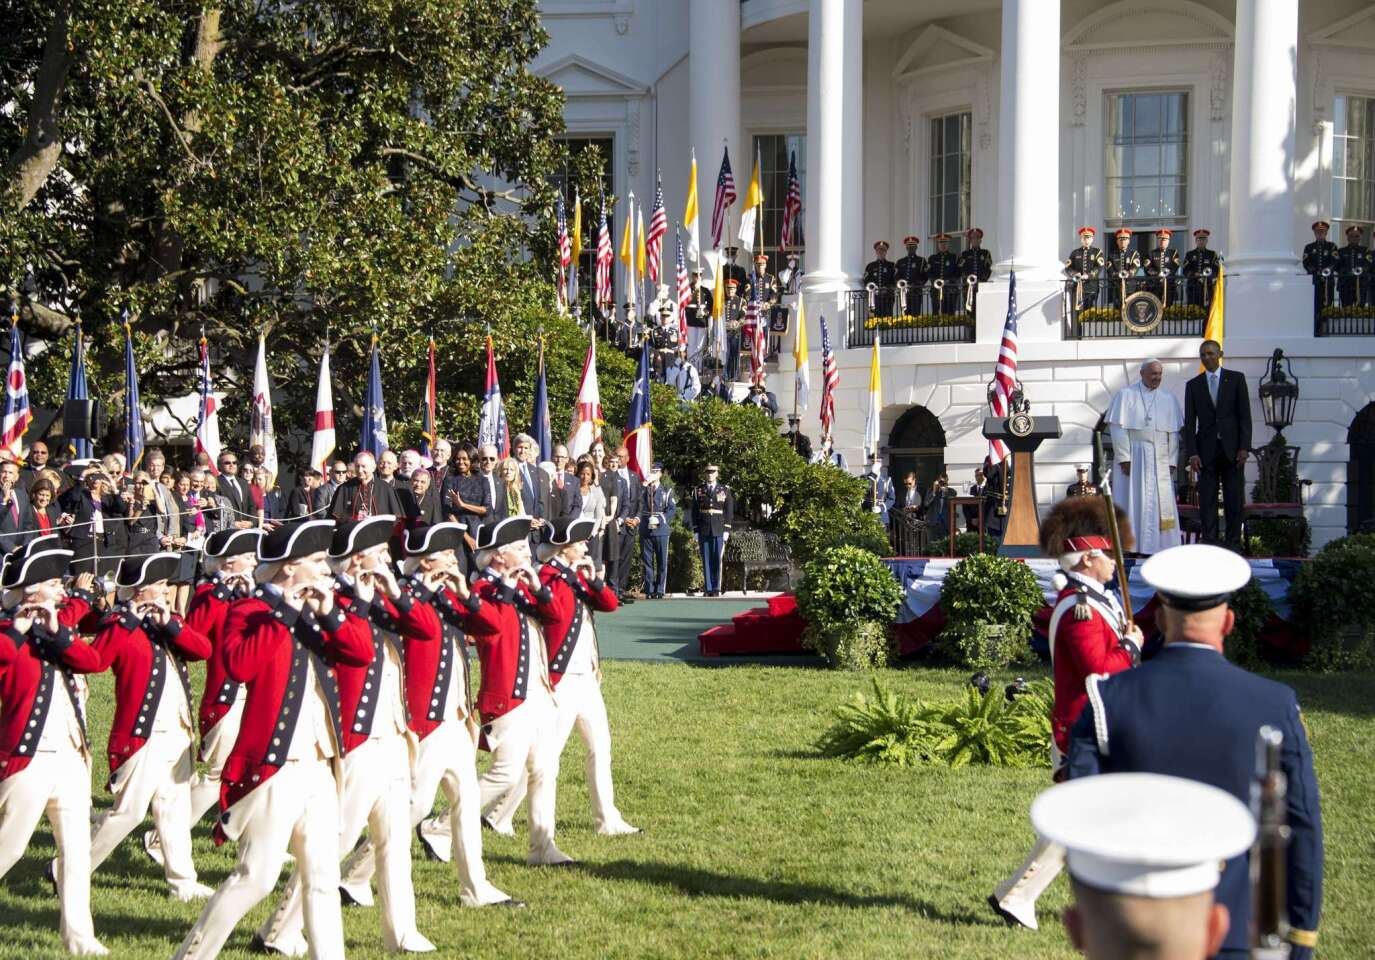 President Barack Obama and Pope Francis review the Fife and Drum Corps during an arrival ceremony on the South Lawn of the White House on Sept. 23, 2015.